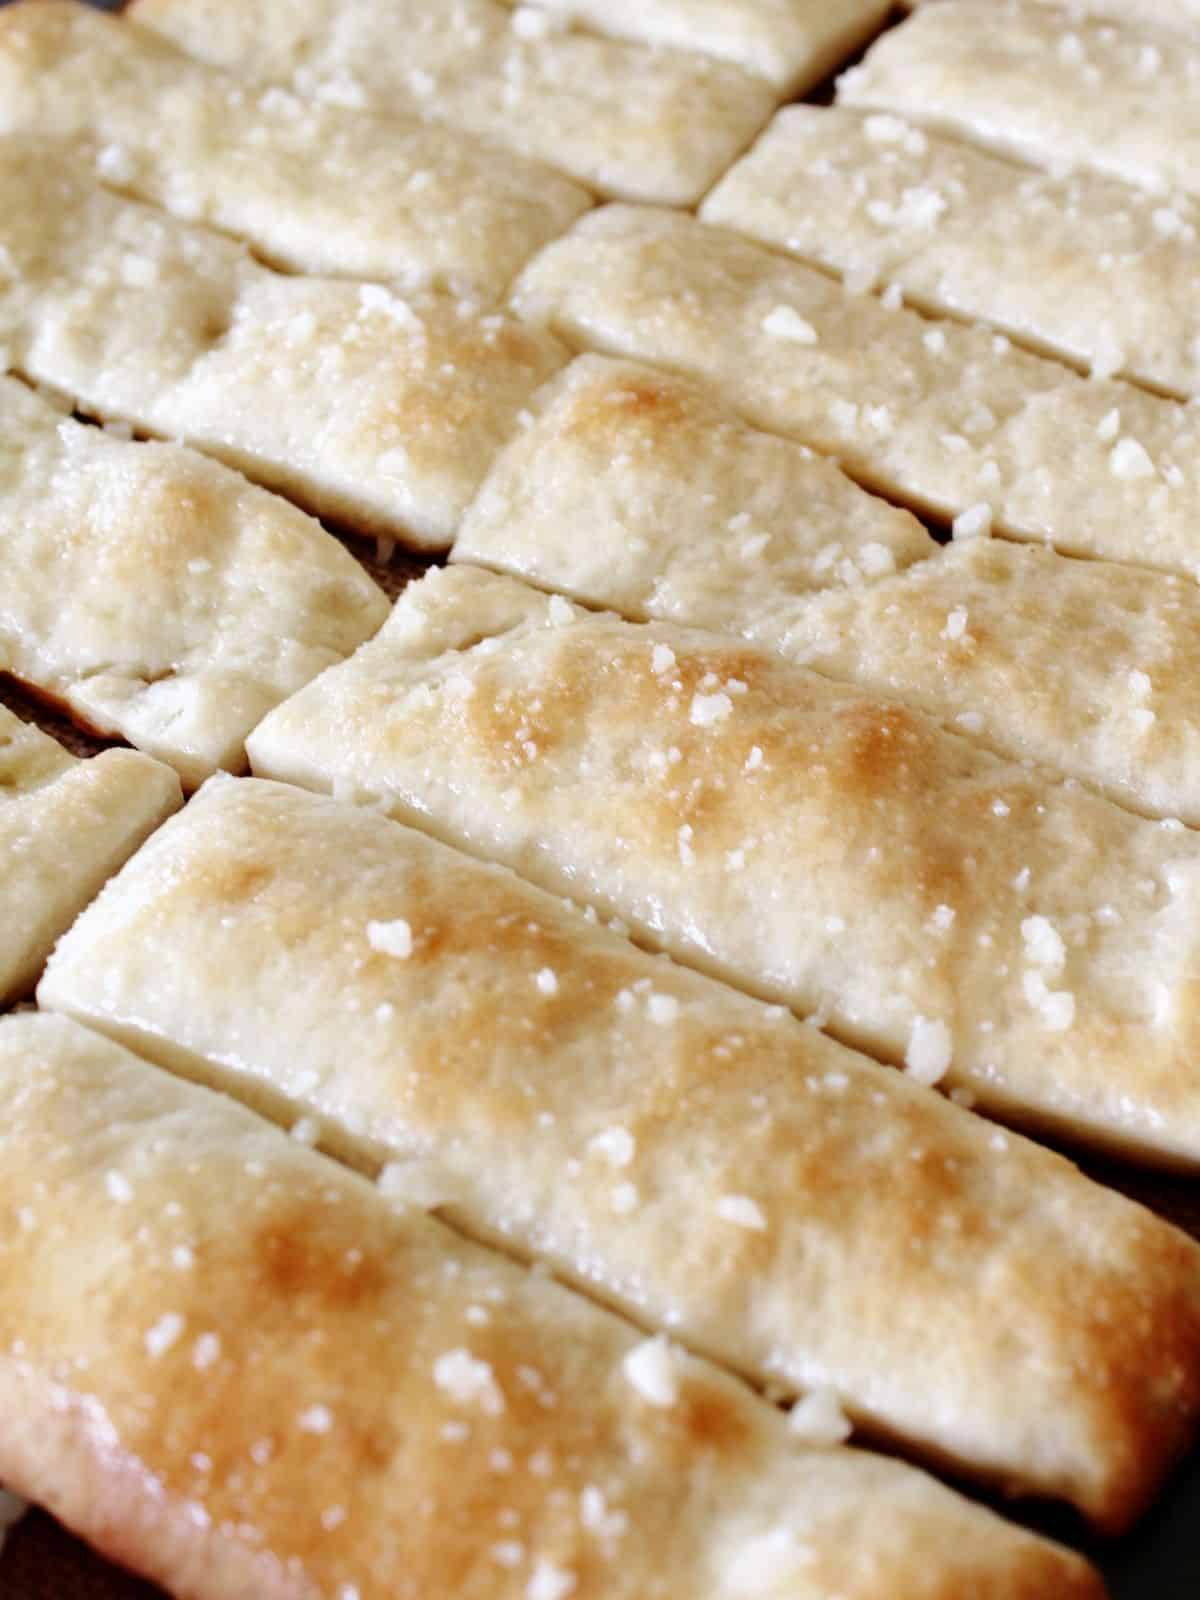 closeup of baked breadsticks on baking tray with Parmesan cheese sprinkled on top.